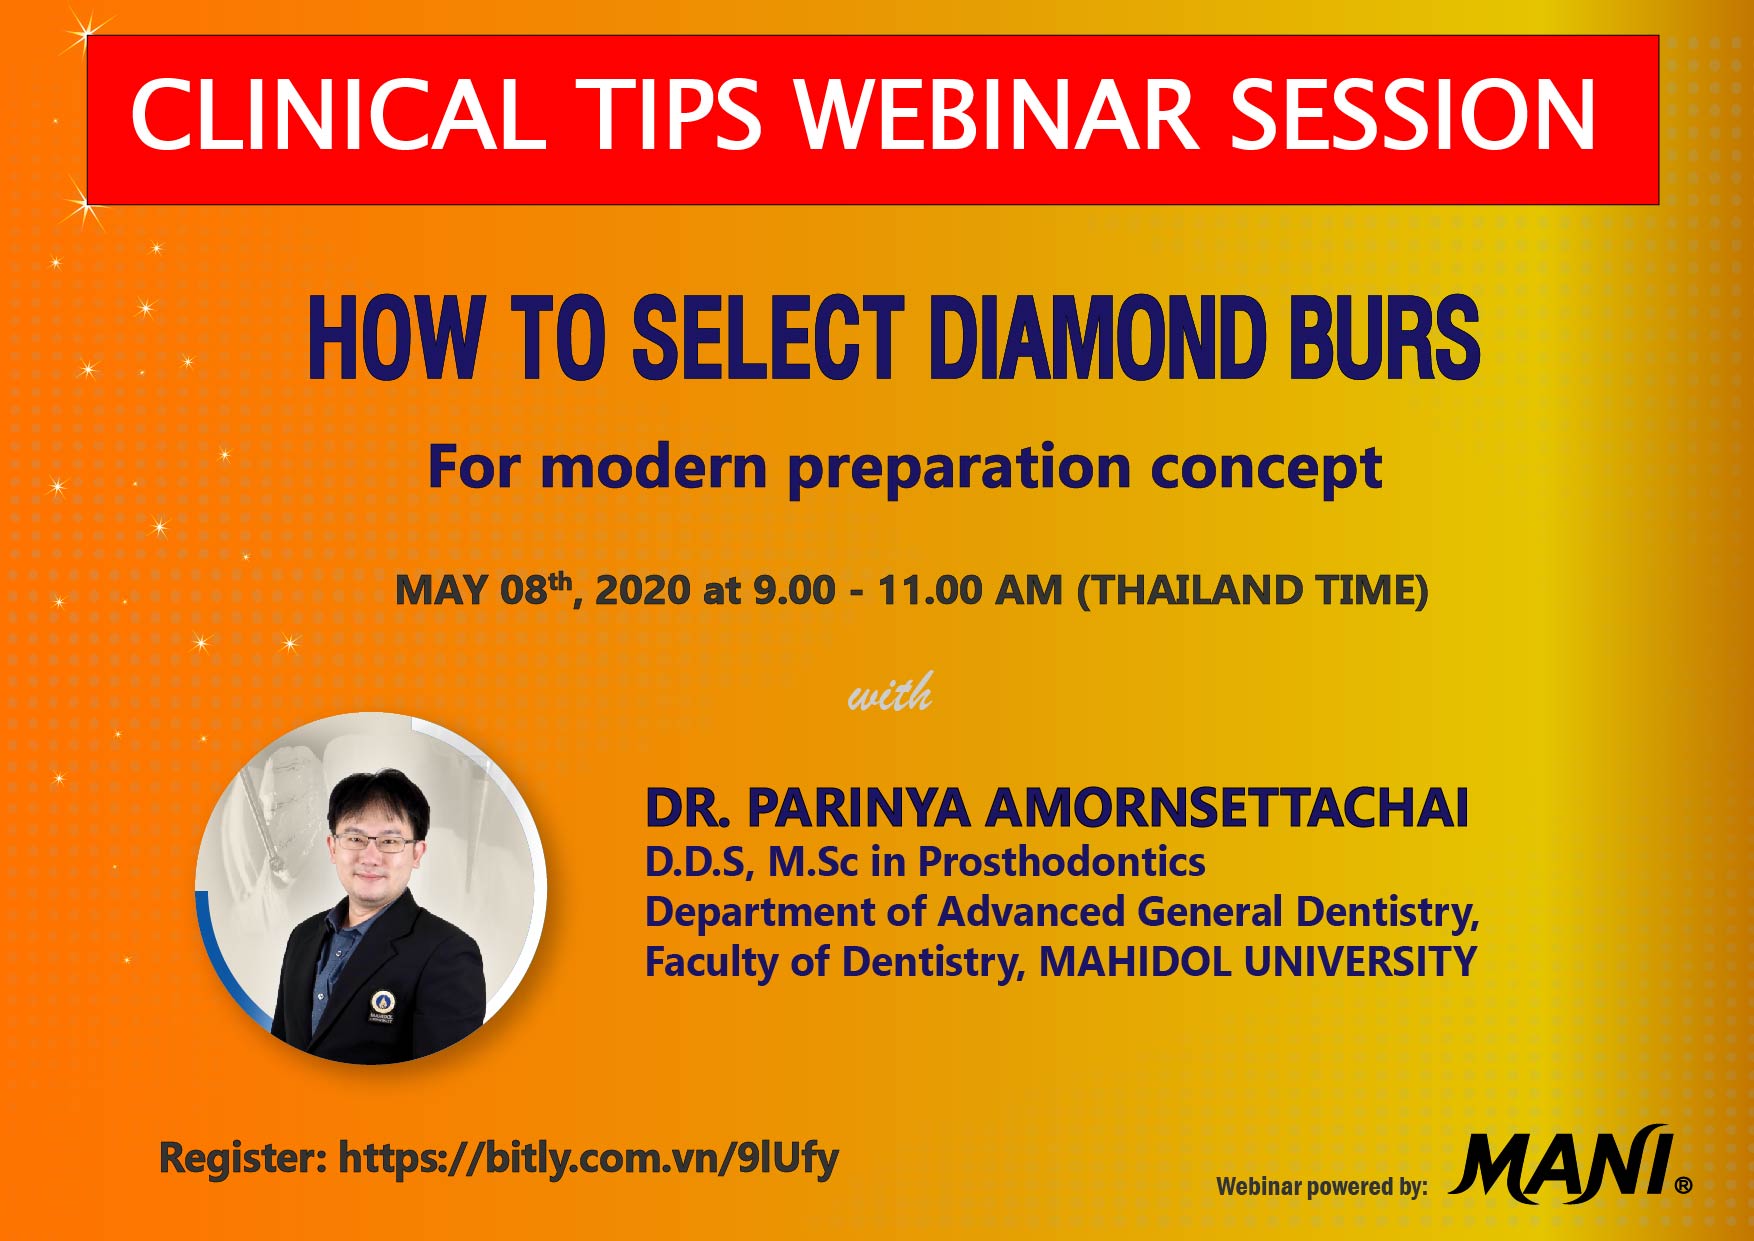 Clinical Tips Webinar Session